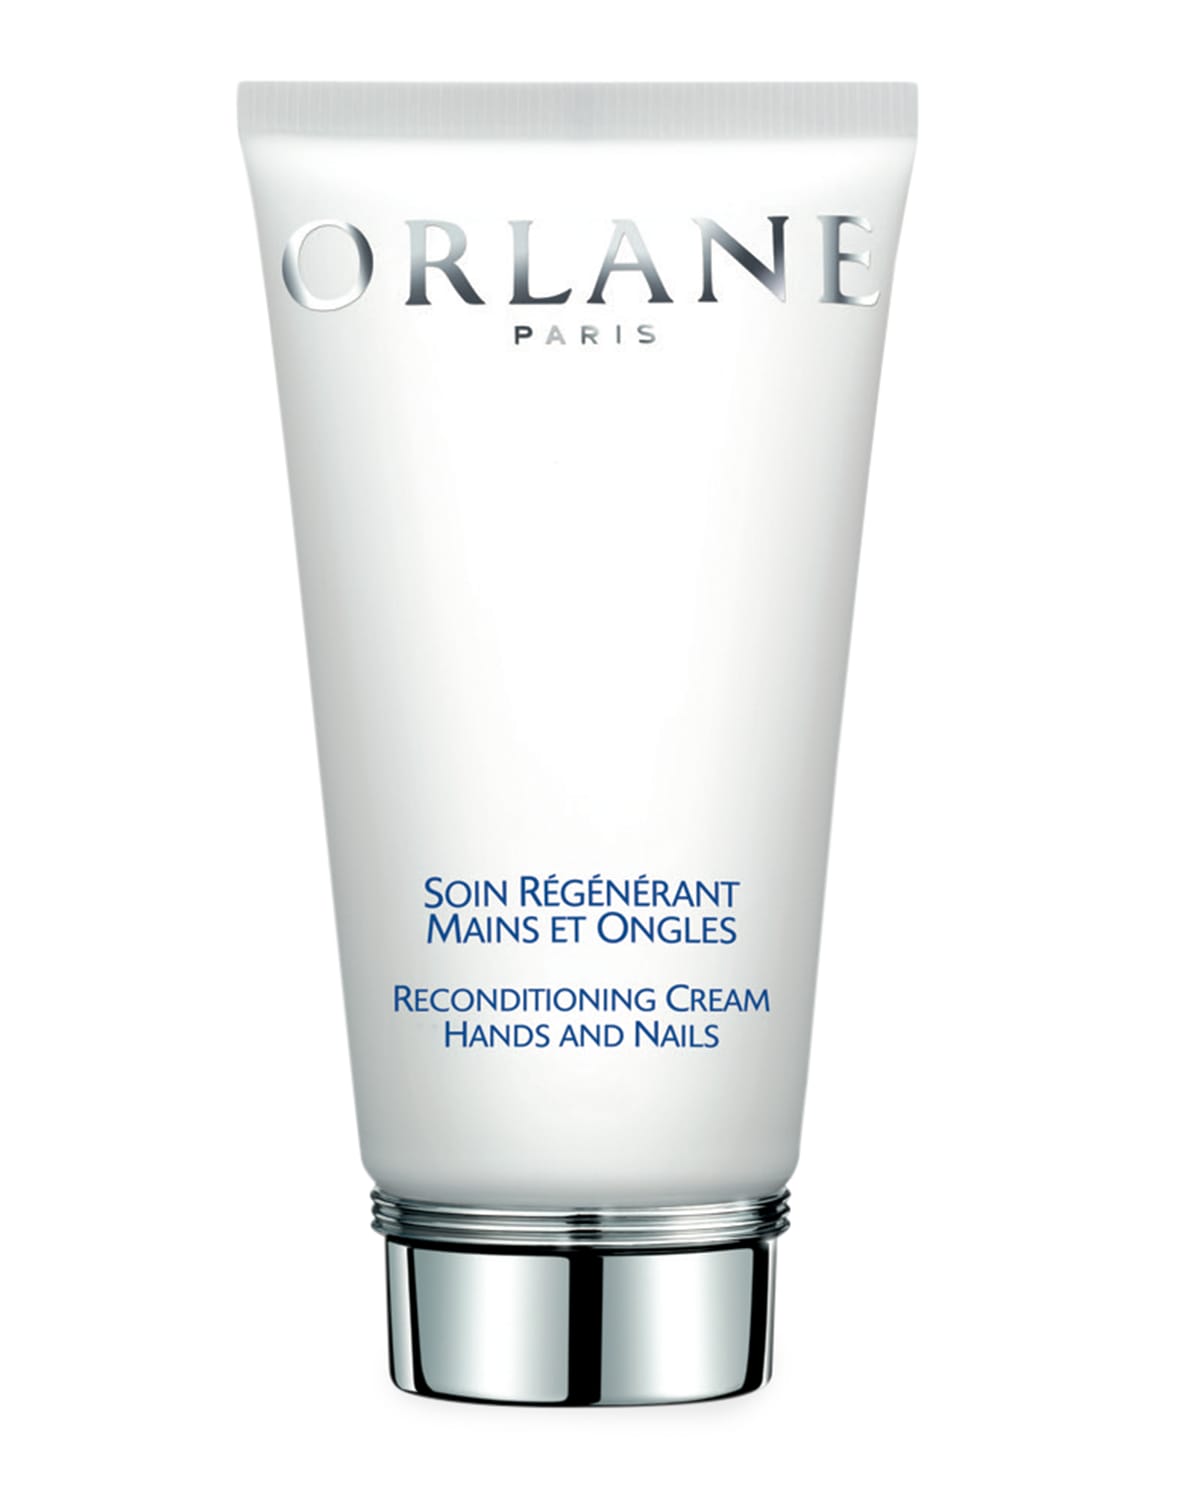 2.5 oz. Reconditioning Cream Hand and Nails